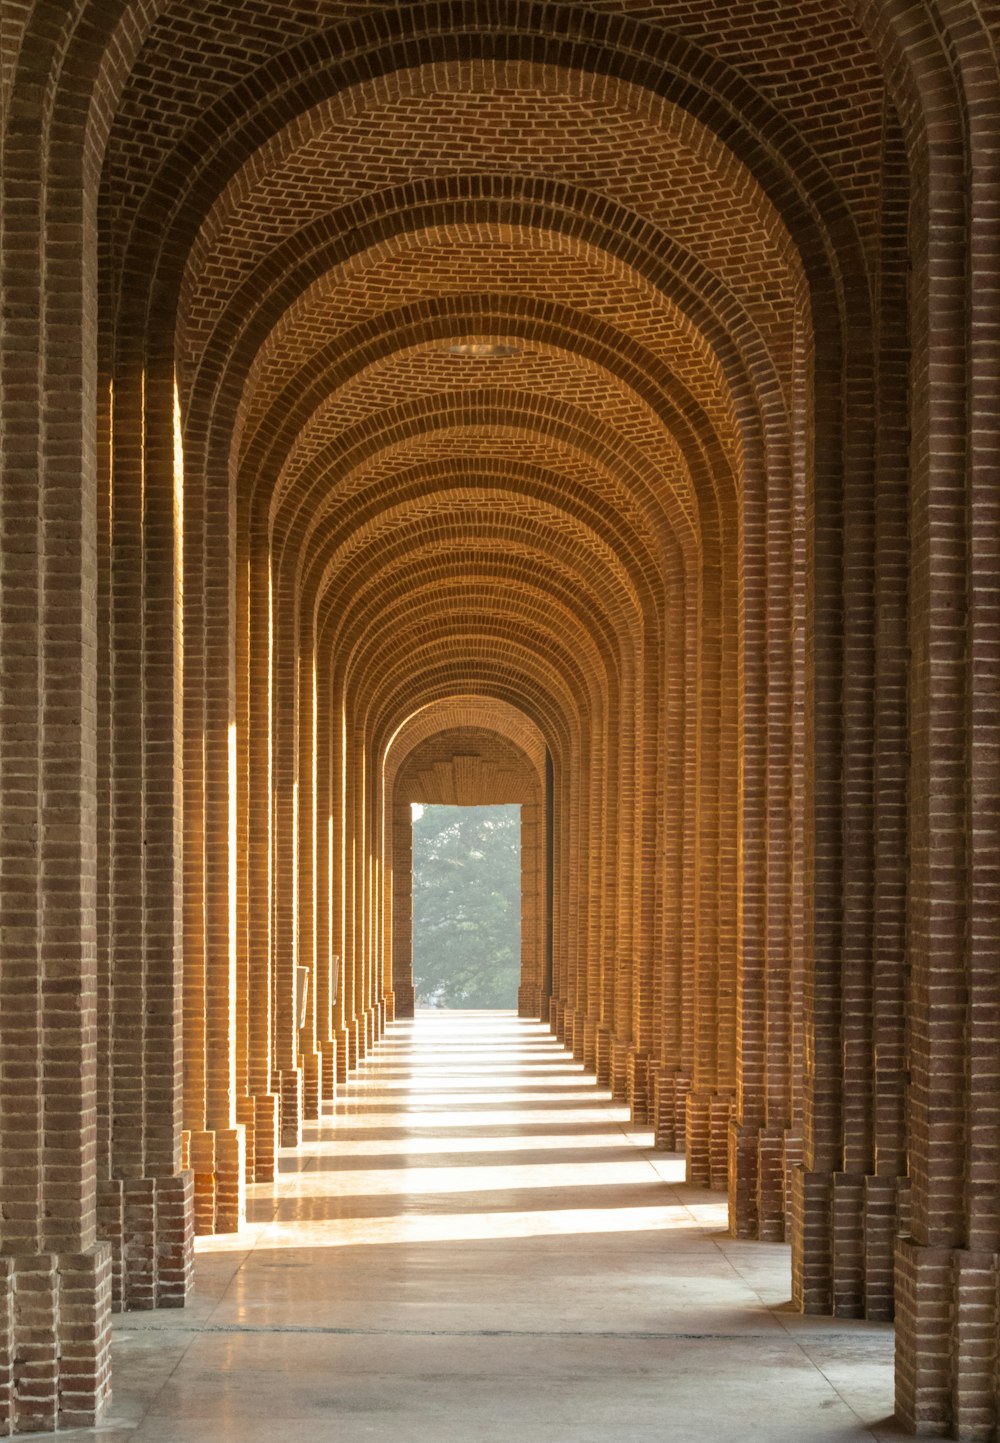 a walkway lined with columns and pillars in a building